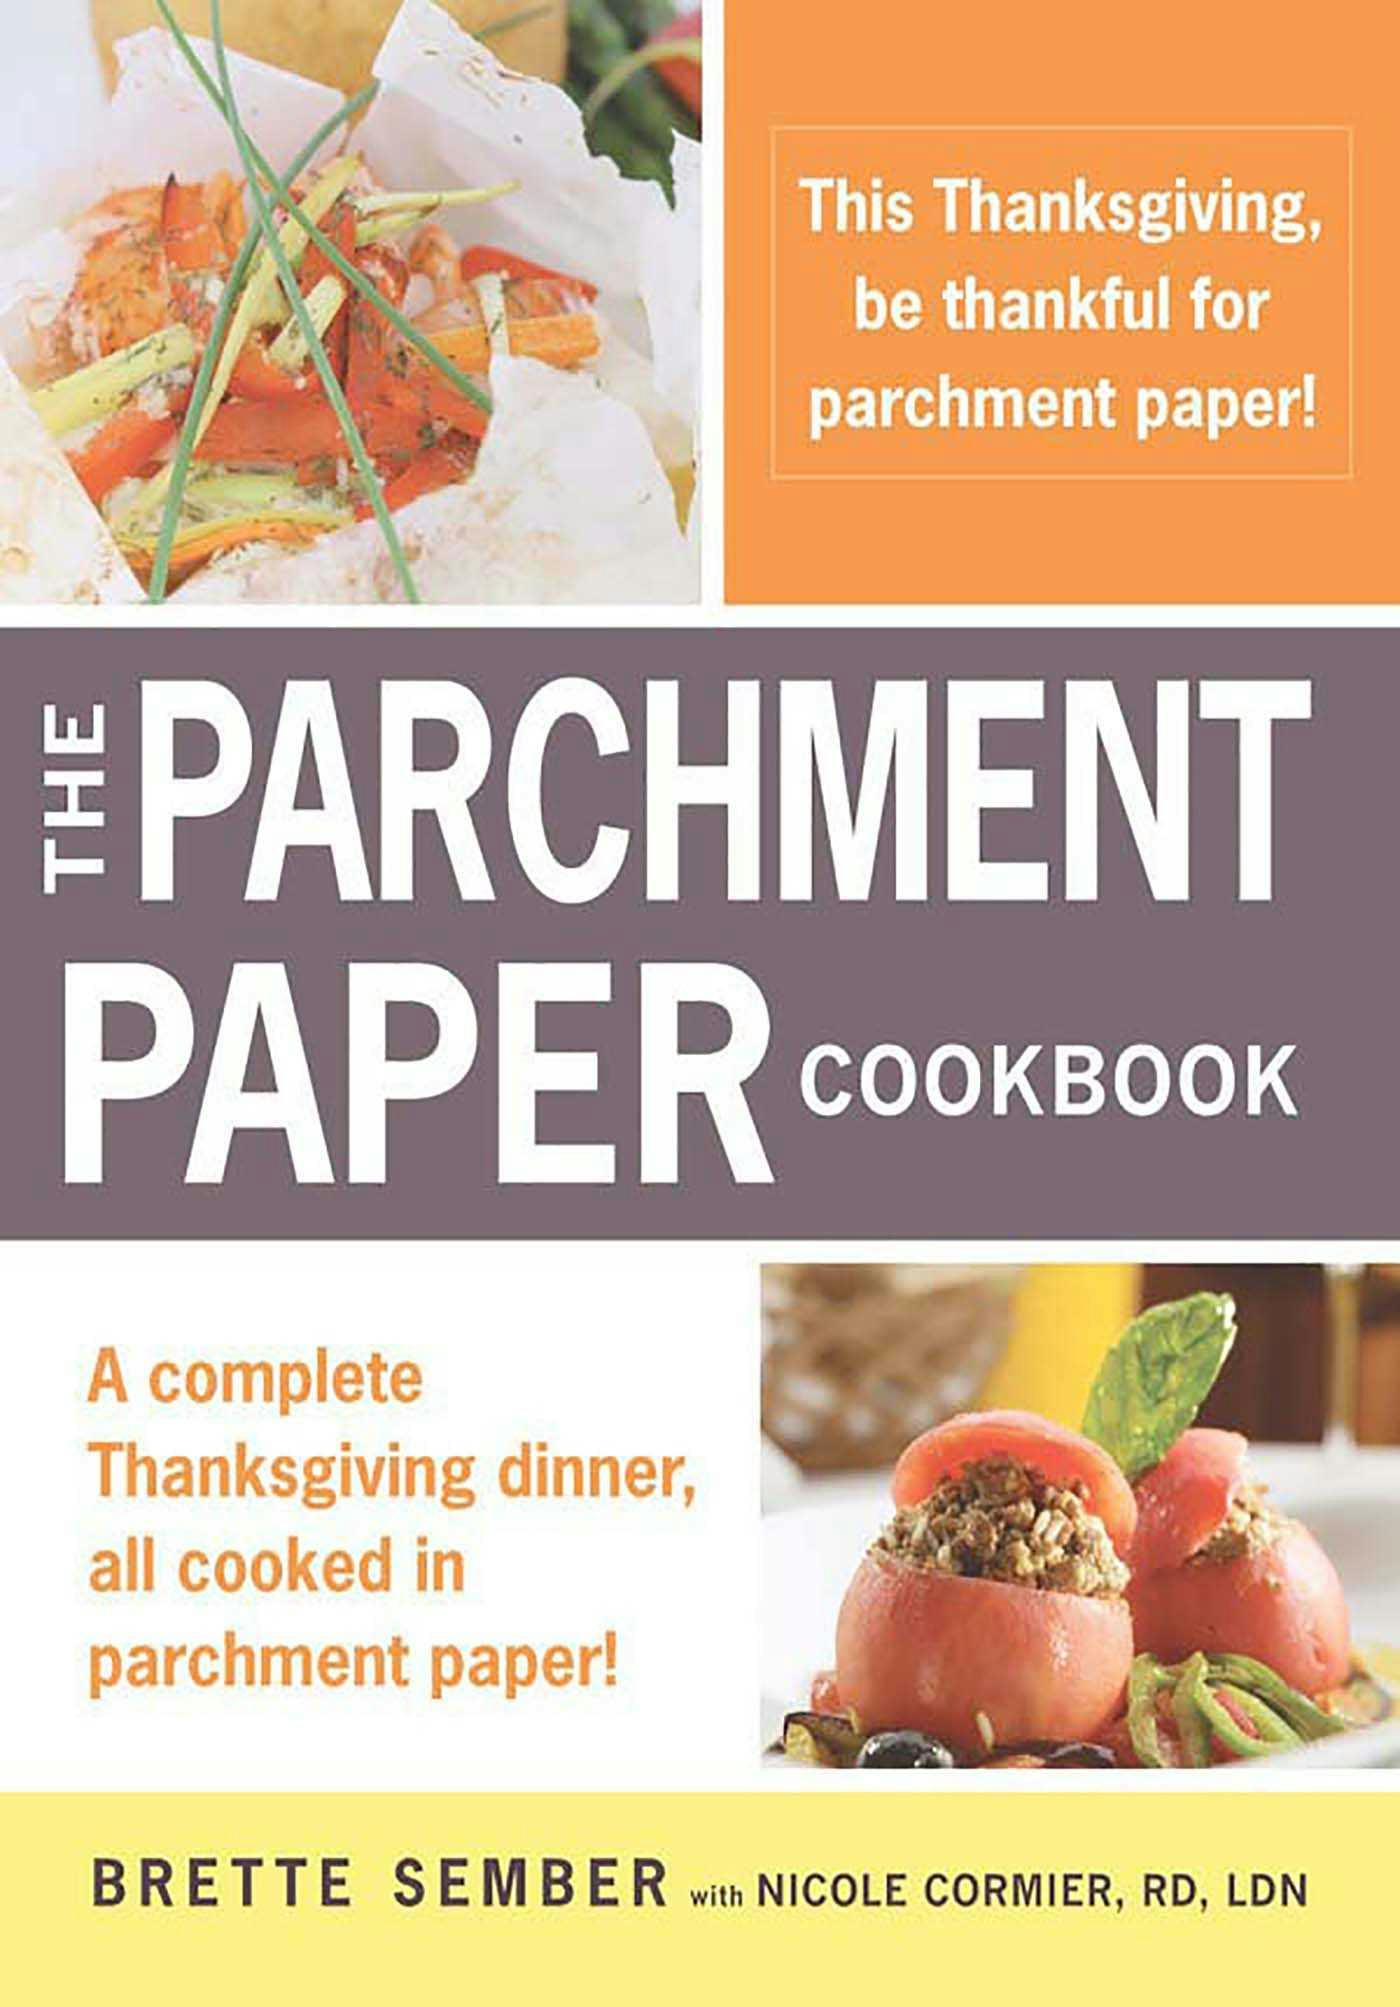 A Parchment Paper Thanksgiving: A Holiday Sampler Menu from the Parchment Paper Cookbook - Brette Sember